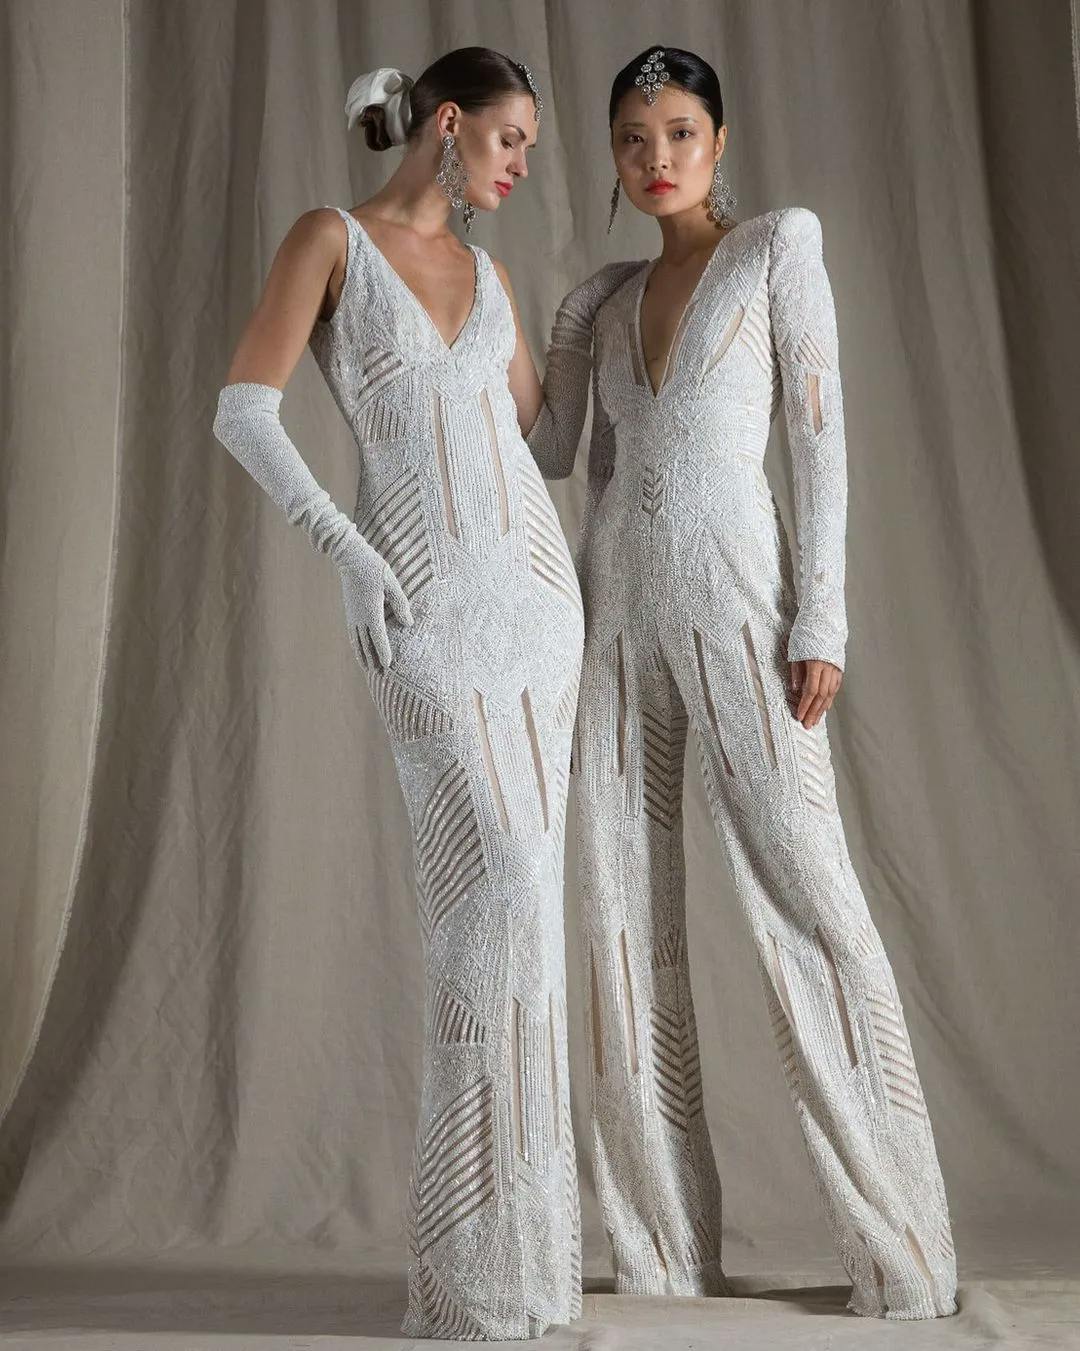 Two brides, one wering a dress, one wearing a jumpsuit